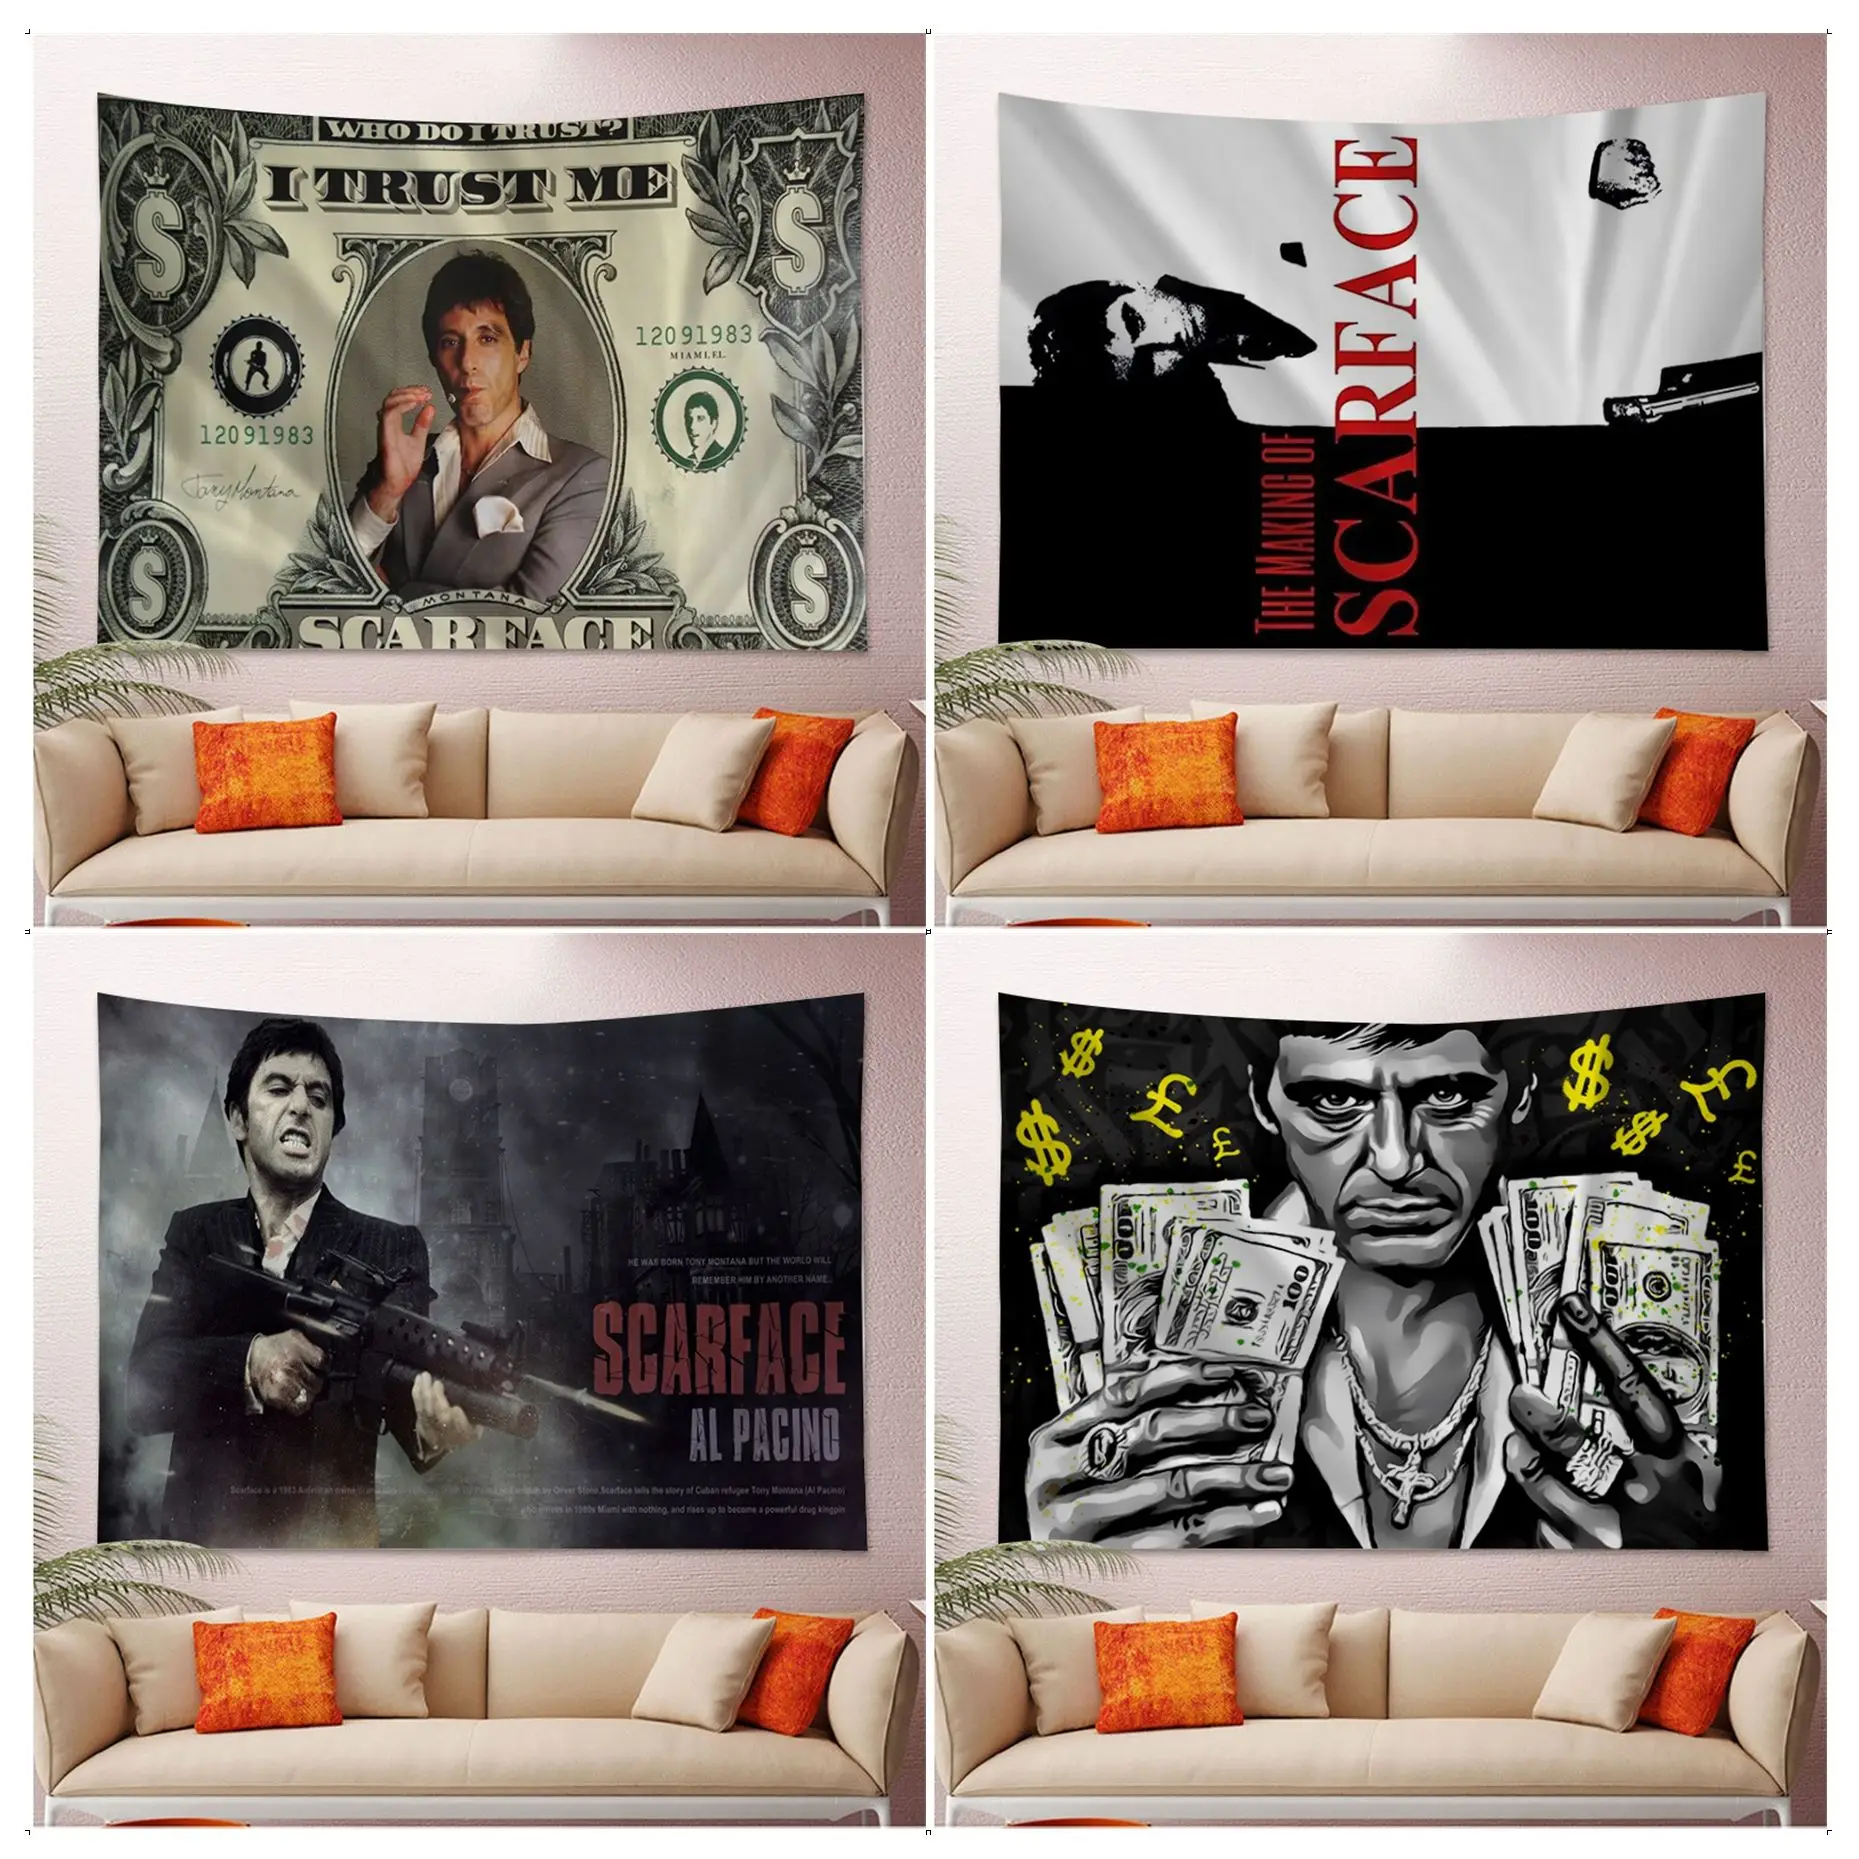 

Movie Scarface Wall Tapestry Indian Buddha Wall Decoration Witchcraft Bohemian Hippie Wall Hanging Home Decor